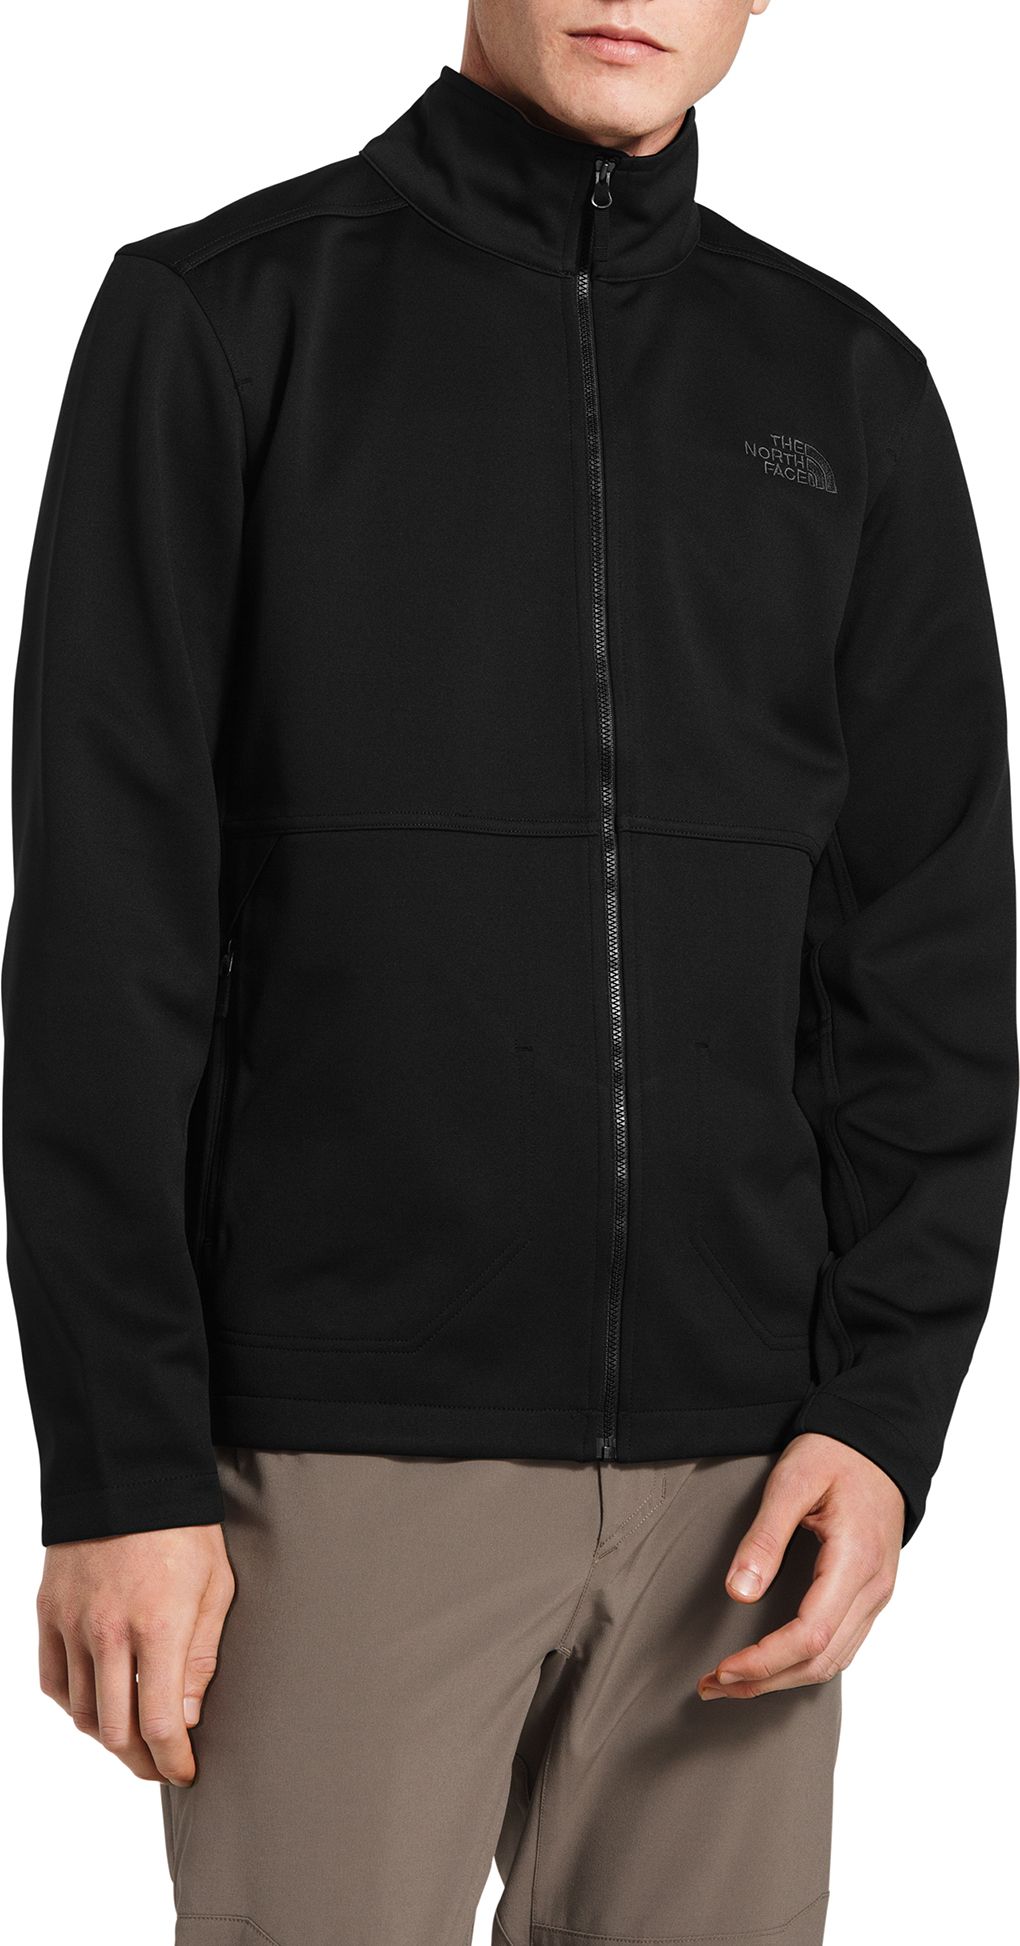 north face men's apex canyonwall soft shell jacket